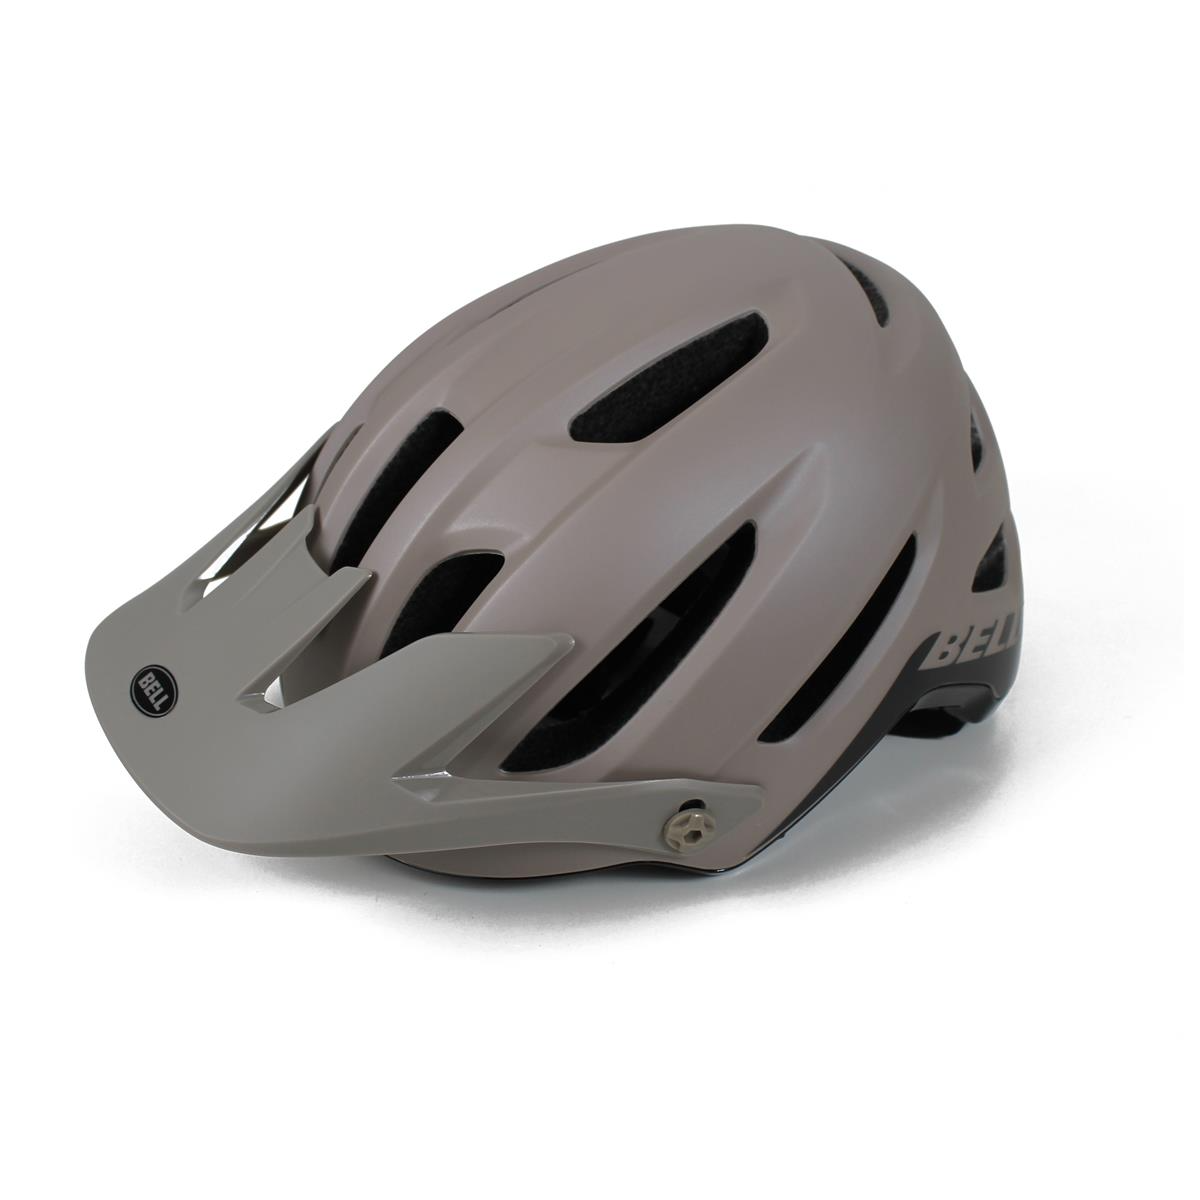 Bell casco mtb 4forty Mips sabbia